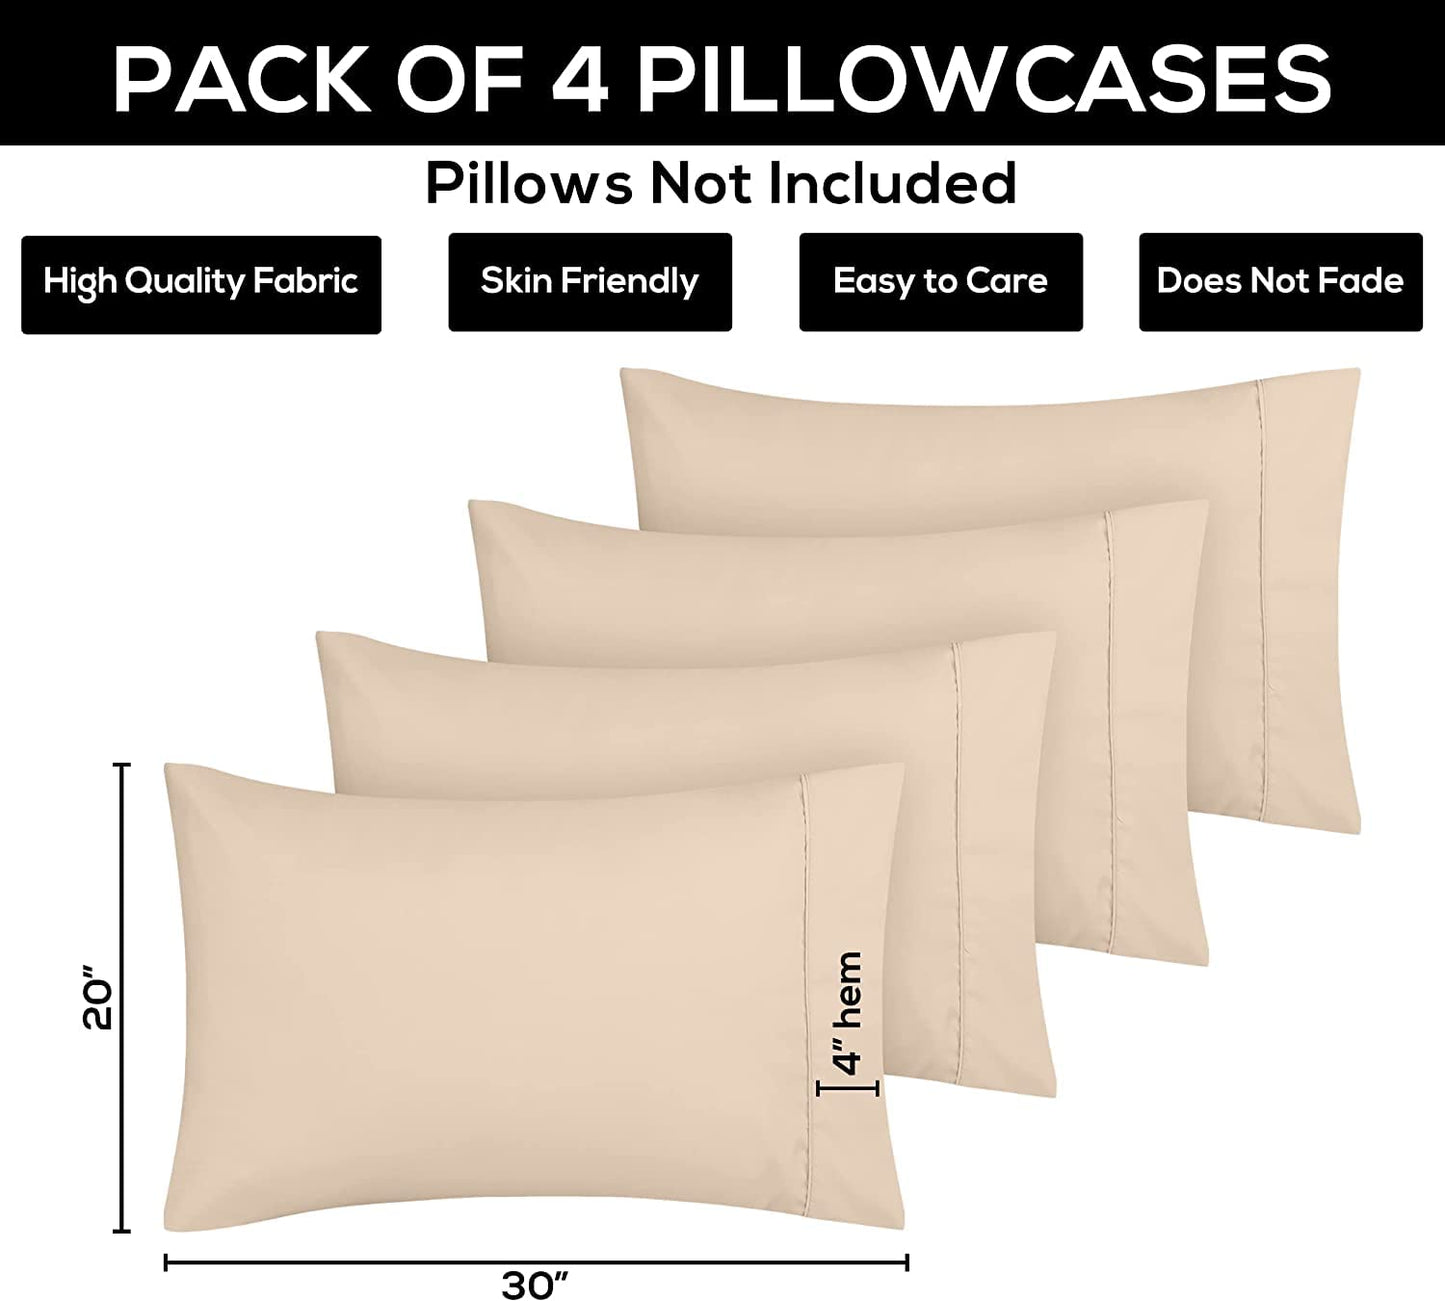 Utopia Bedding Queen Pillow Cases - 4 Pack - Envelope Closure - Soft Brushed Microfiber Fabric - Shrinkage and Fade Resistant Pillow Cases Queen Size 20 X 30 Inches (Queen, Beige)